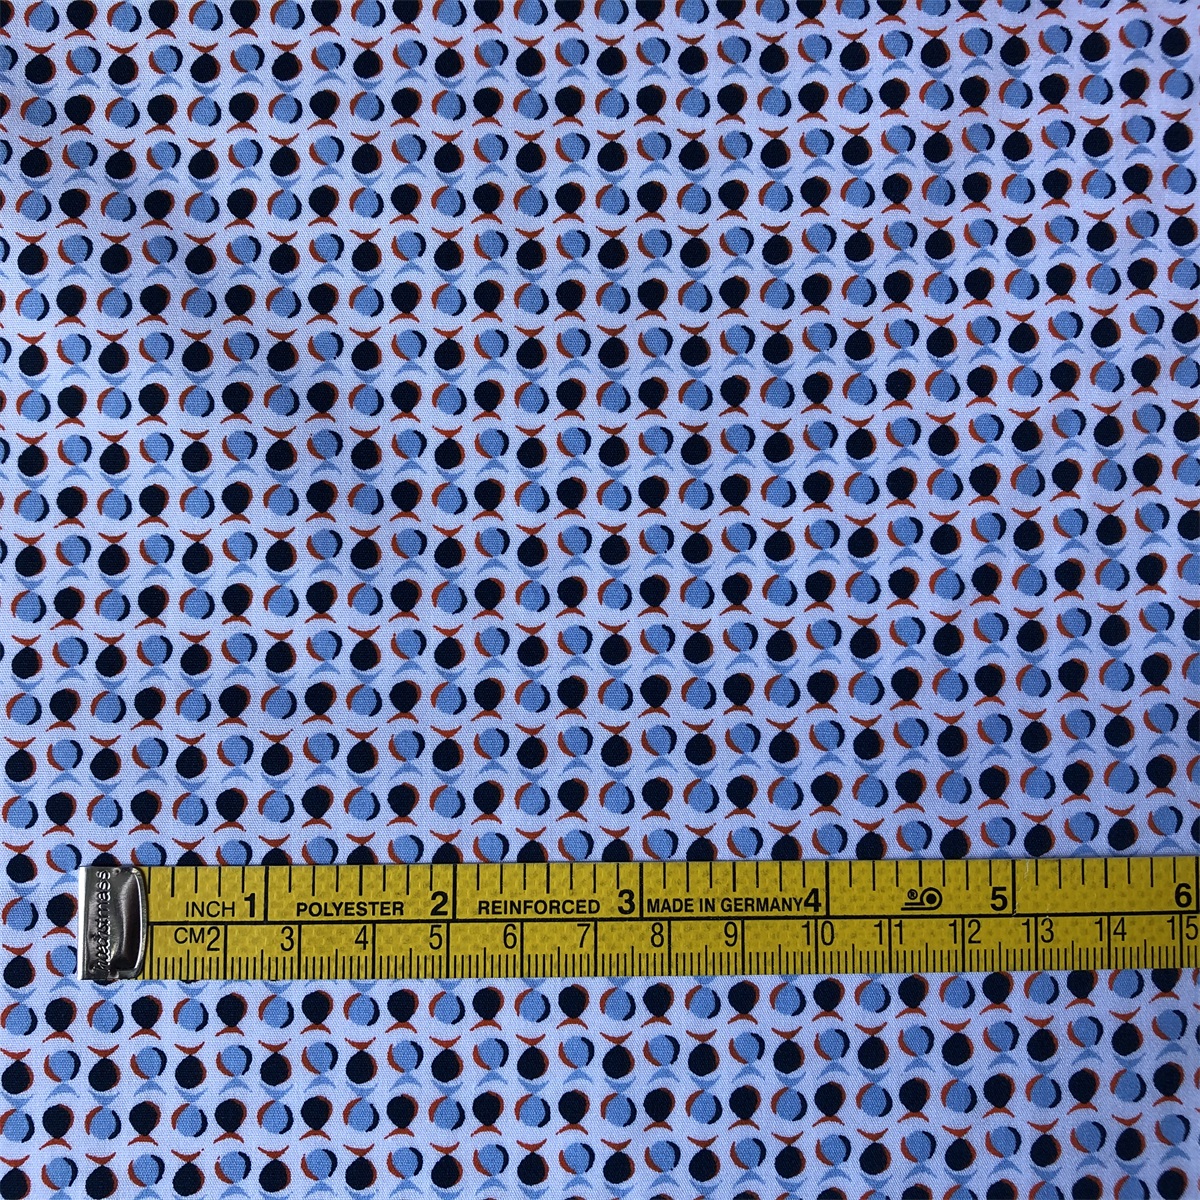 Sun-rising Textile Cotton Printed fabric high quality Eco-friendly 100%cotton poplin printed woven fabric for men's shirts